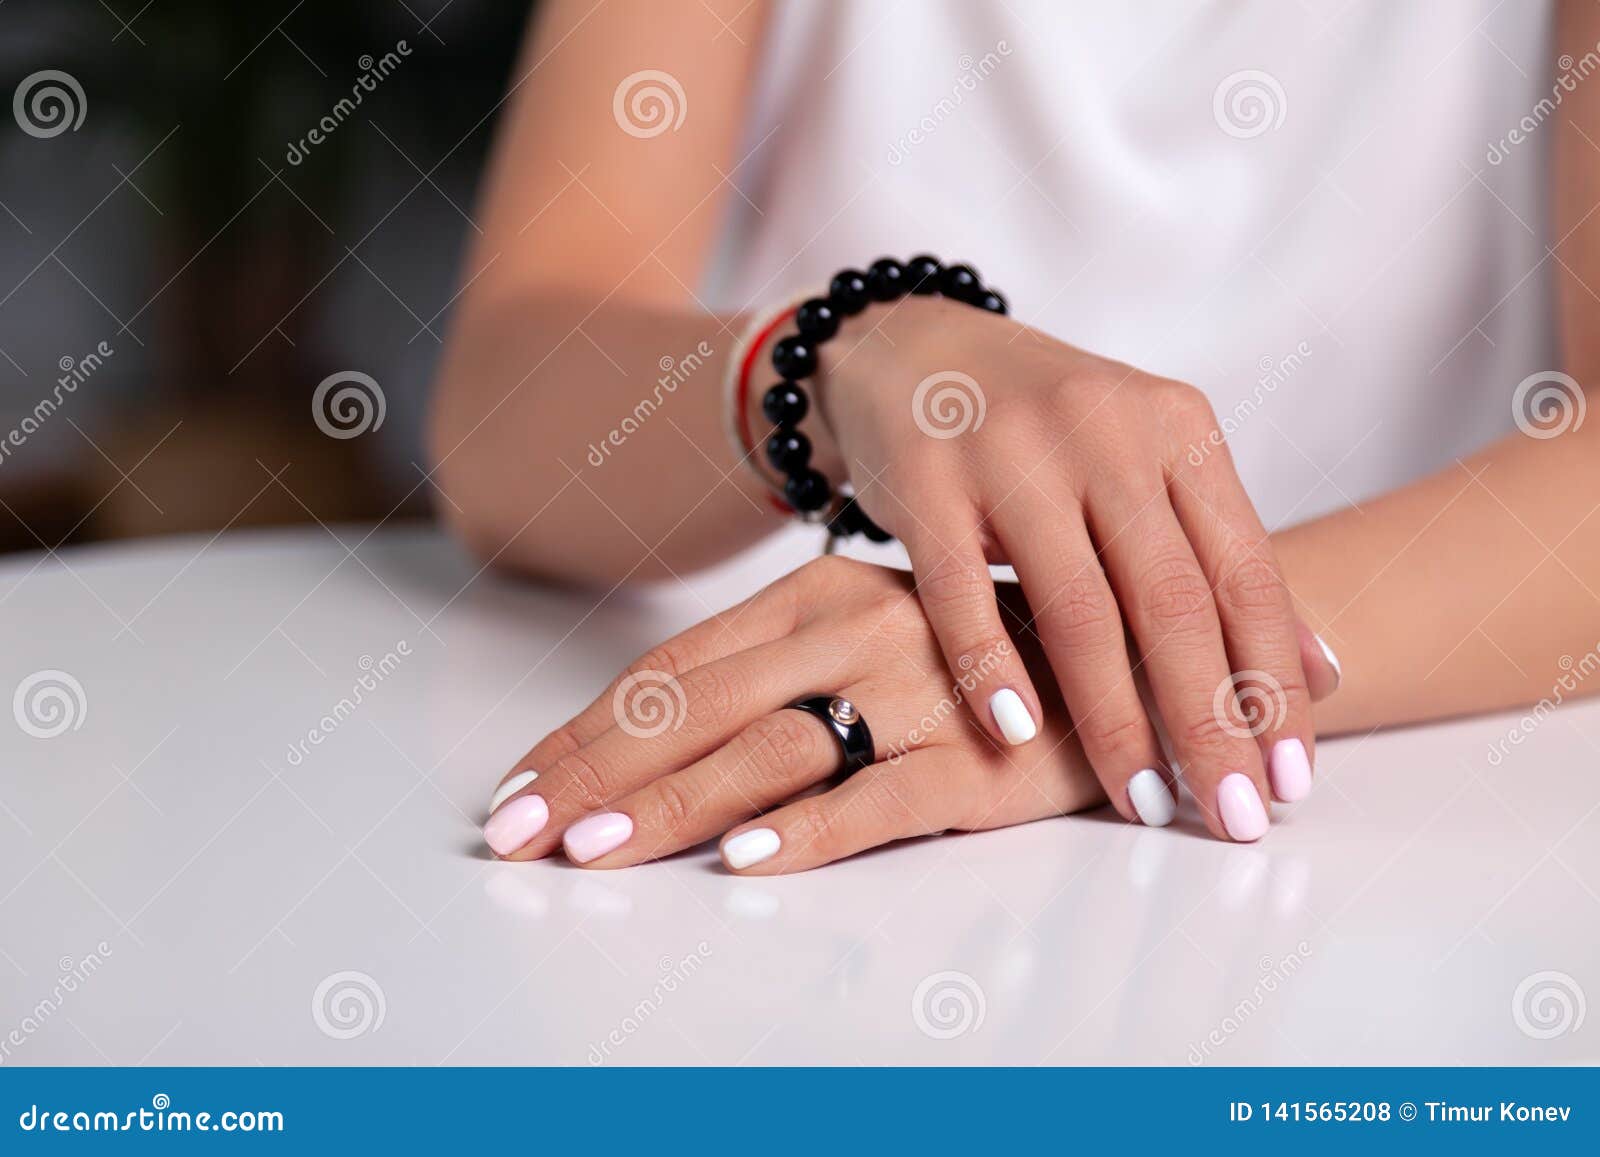 closeup model hands with manicure, white nails, black ring with stone, bracelet made of shiny black beads, red, beige braided